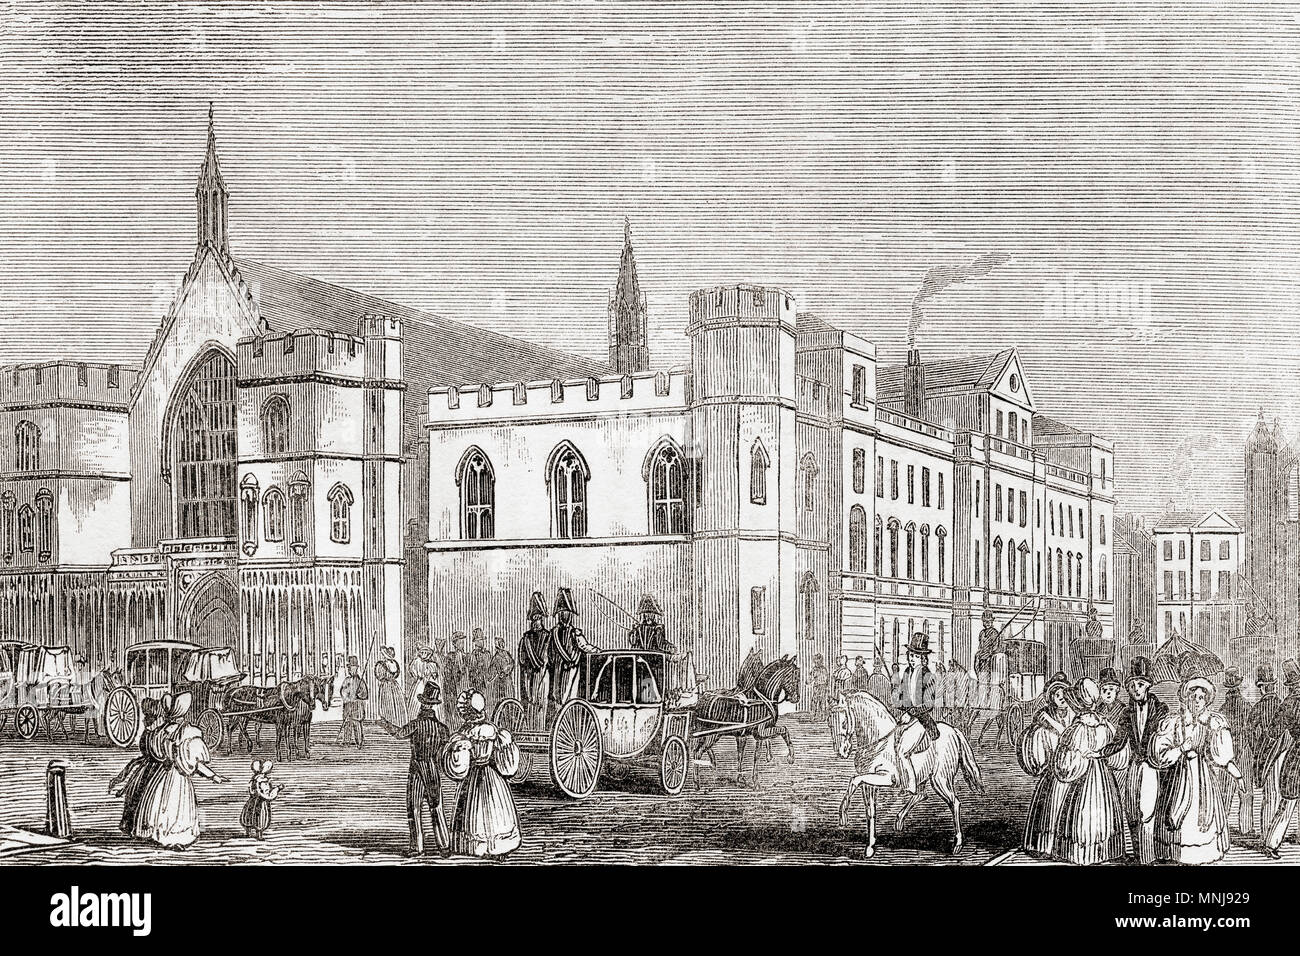 Old Houses of Lords and Commons, Palace of Westminster, London, England, seen here before the fire of 1834.  From Old England: A Pictorial Museum, published 1847. Stock Photo